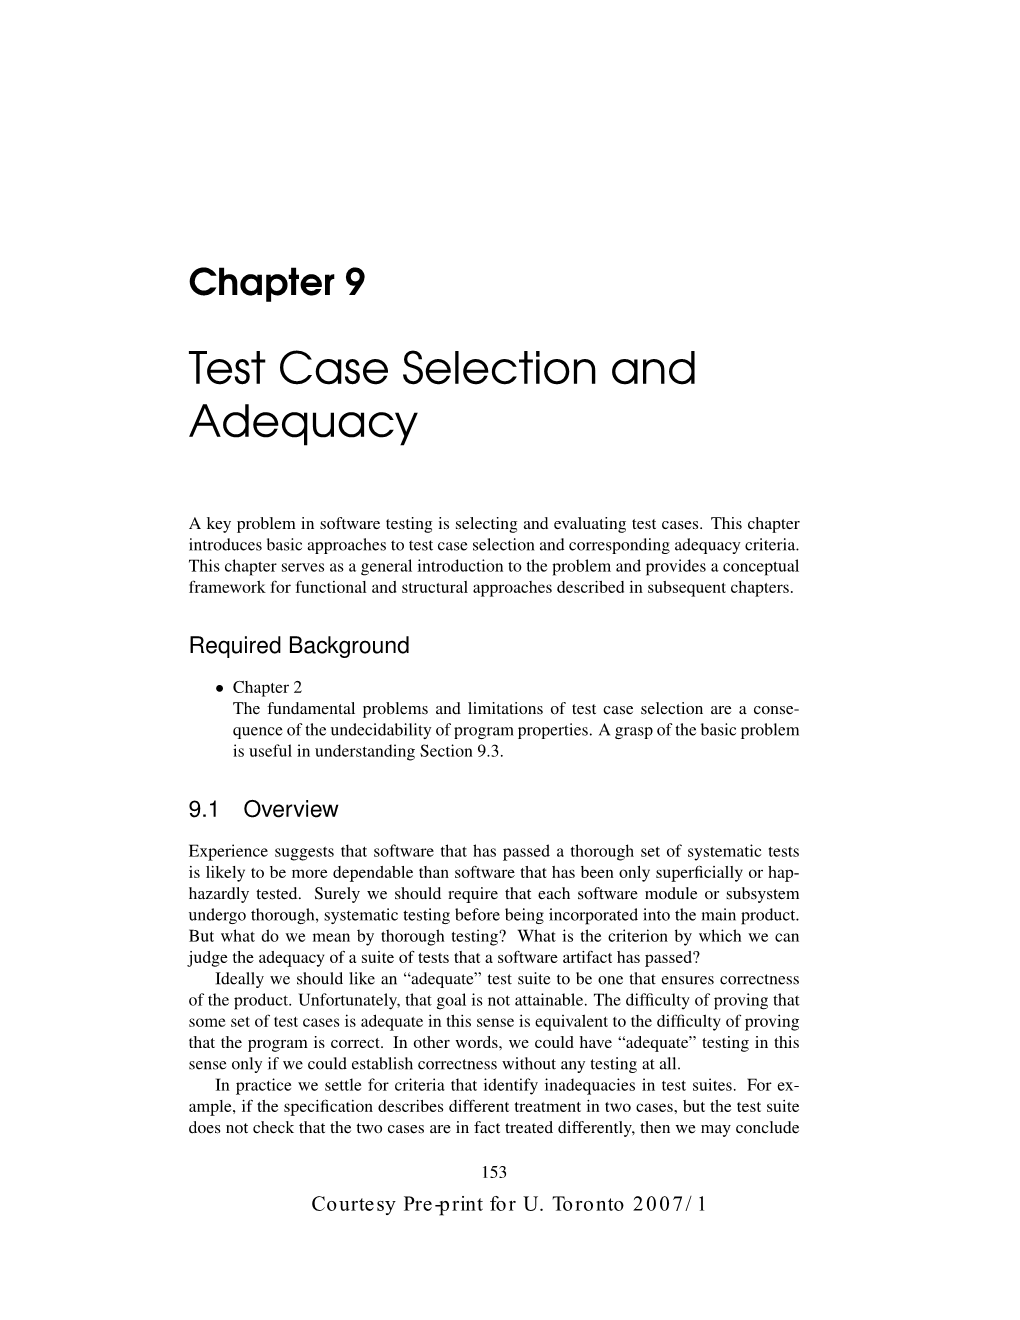 Test Case Selection and Adequacy